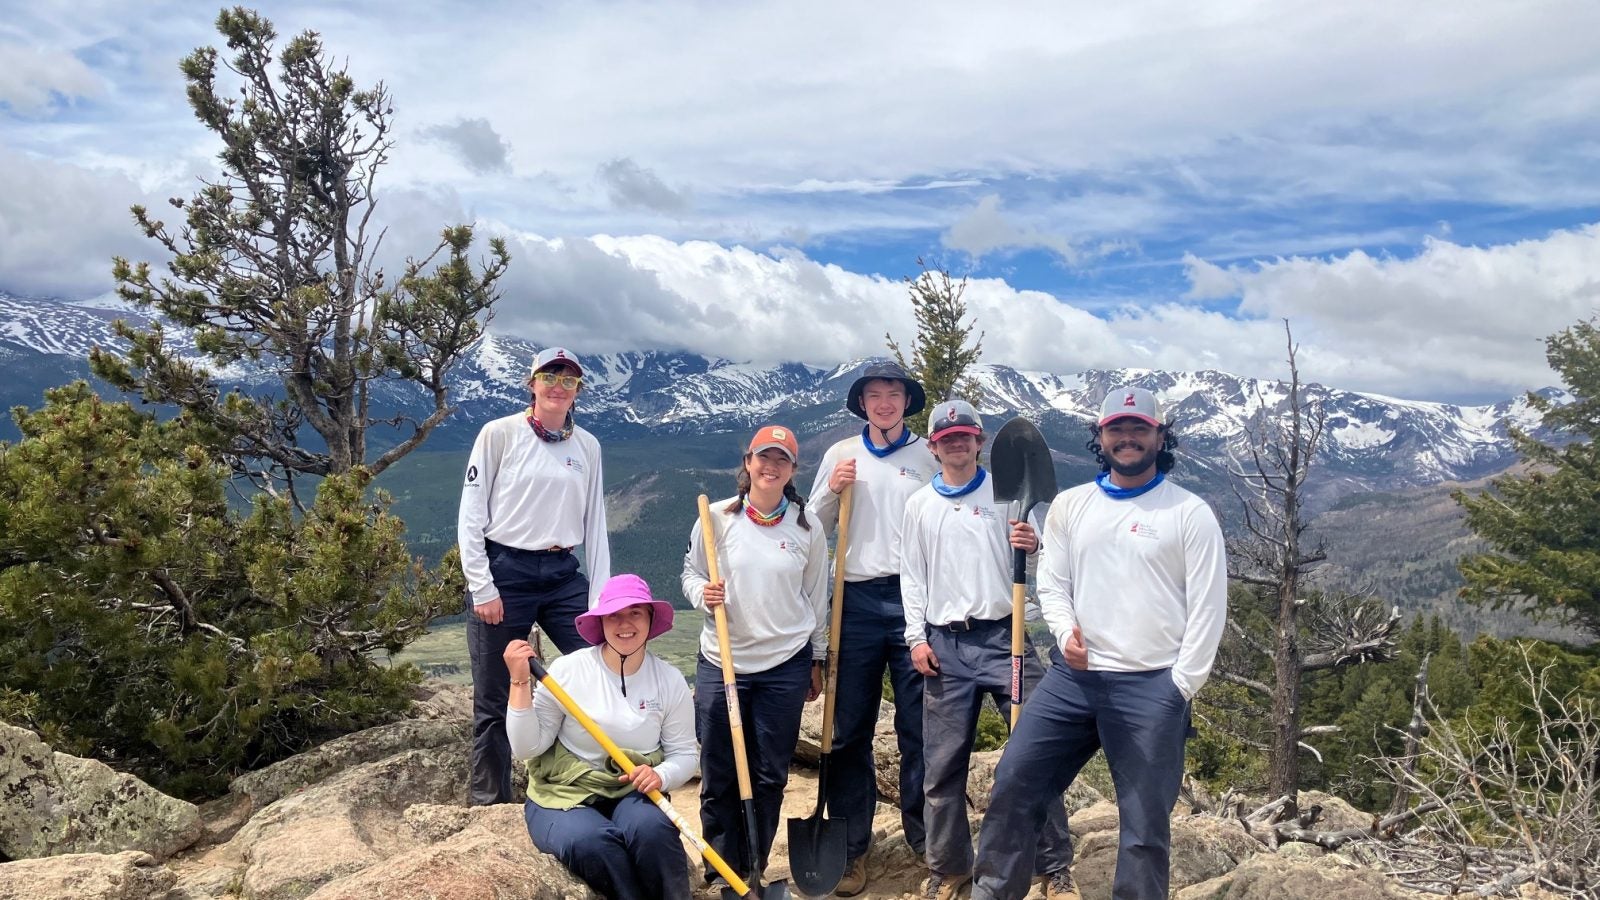 Six people in white shirts standing on top of a mountain on a cloudy day